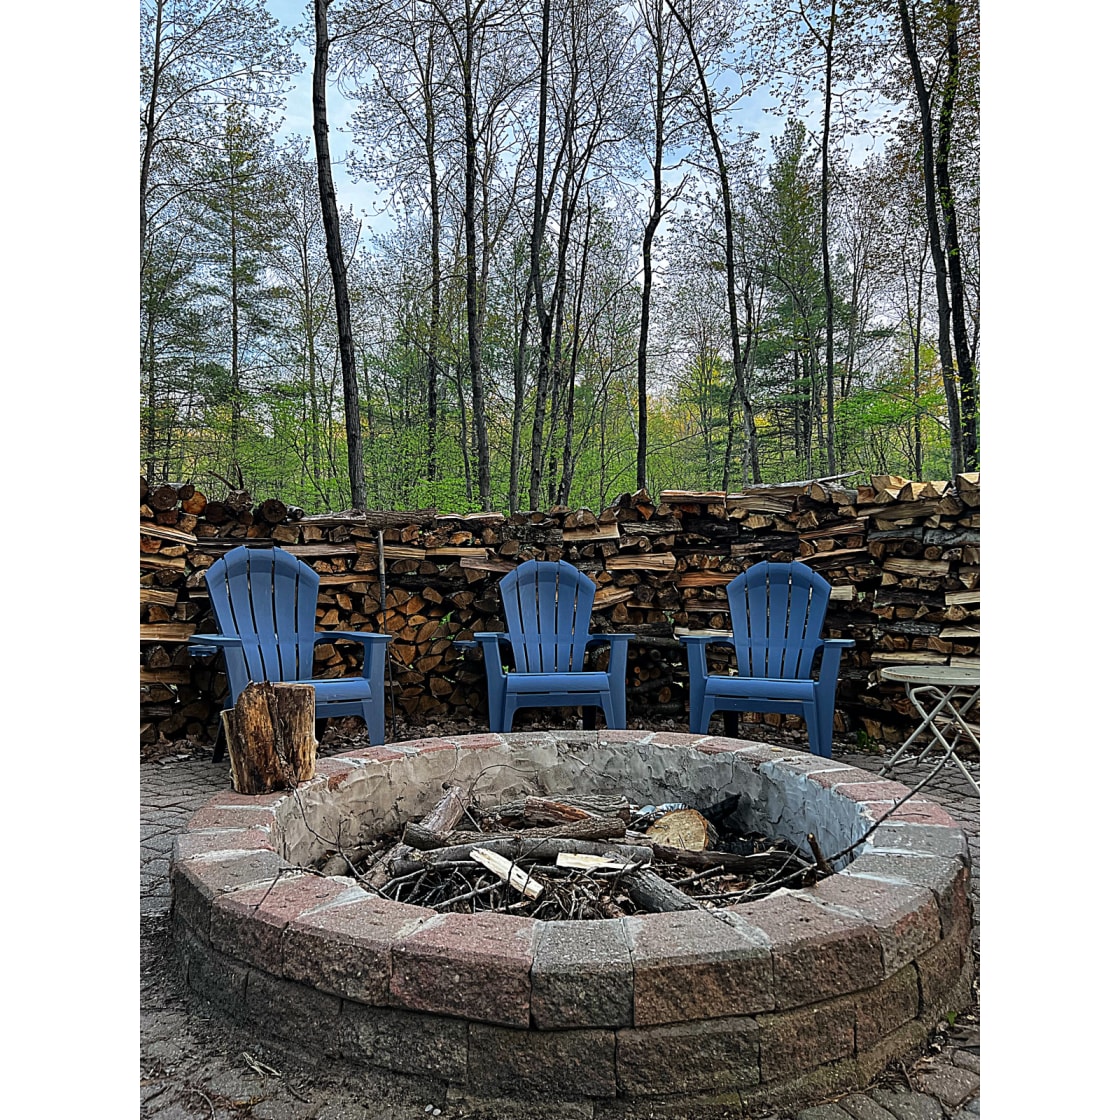 Retreat’s shared fire pit